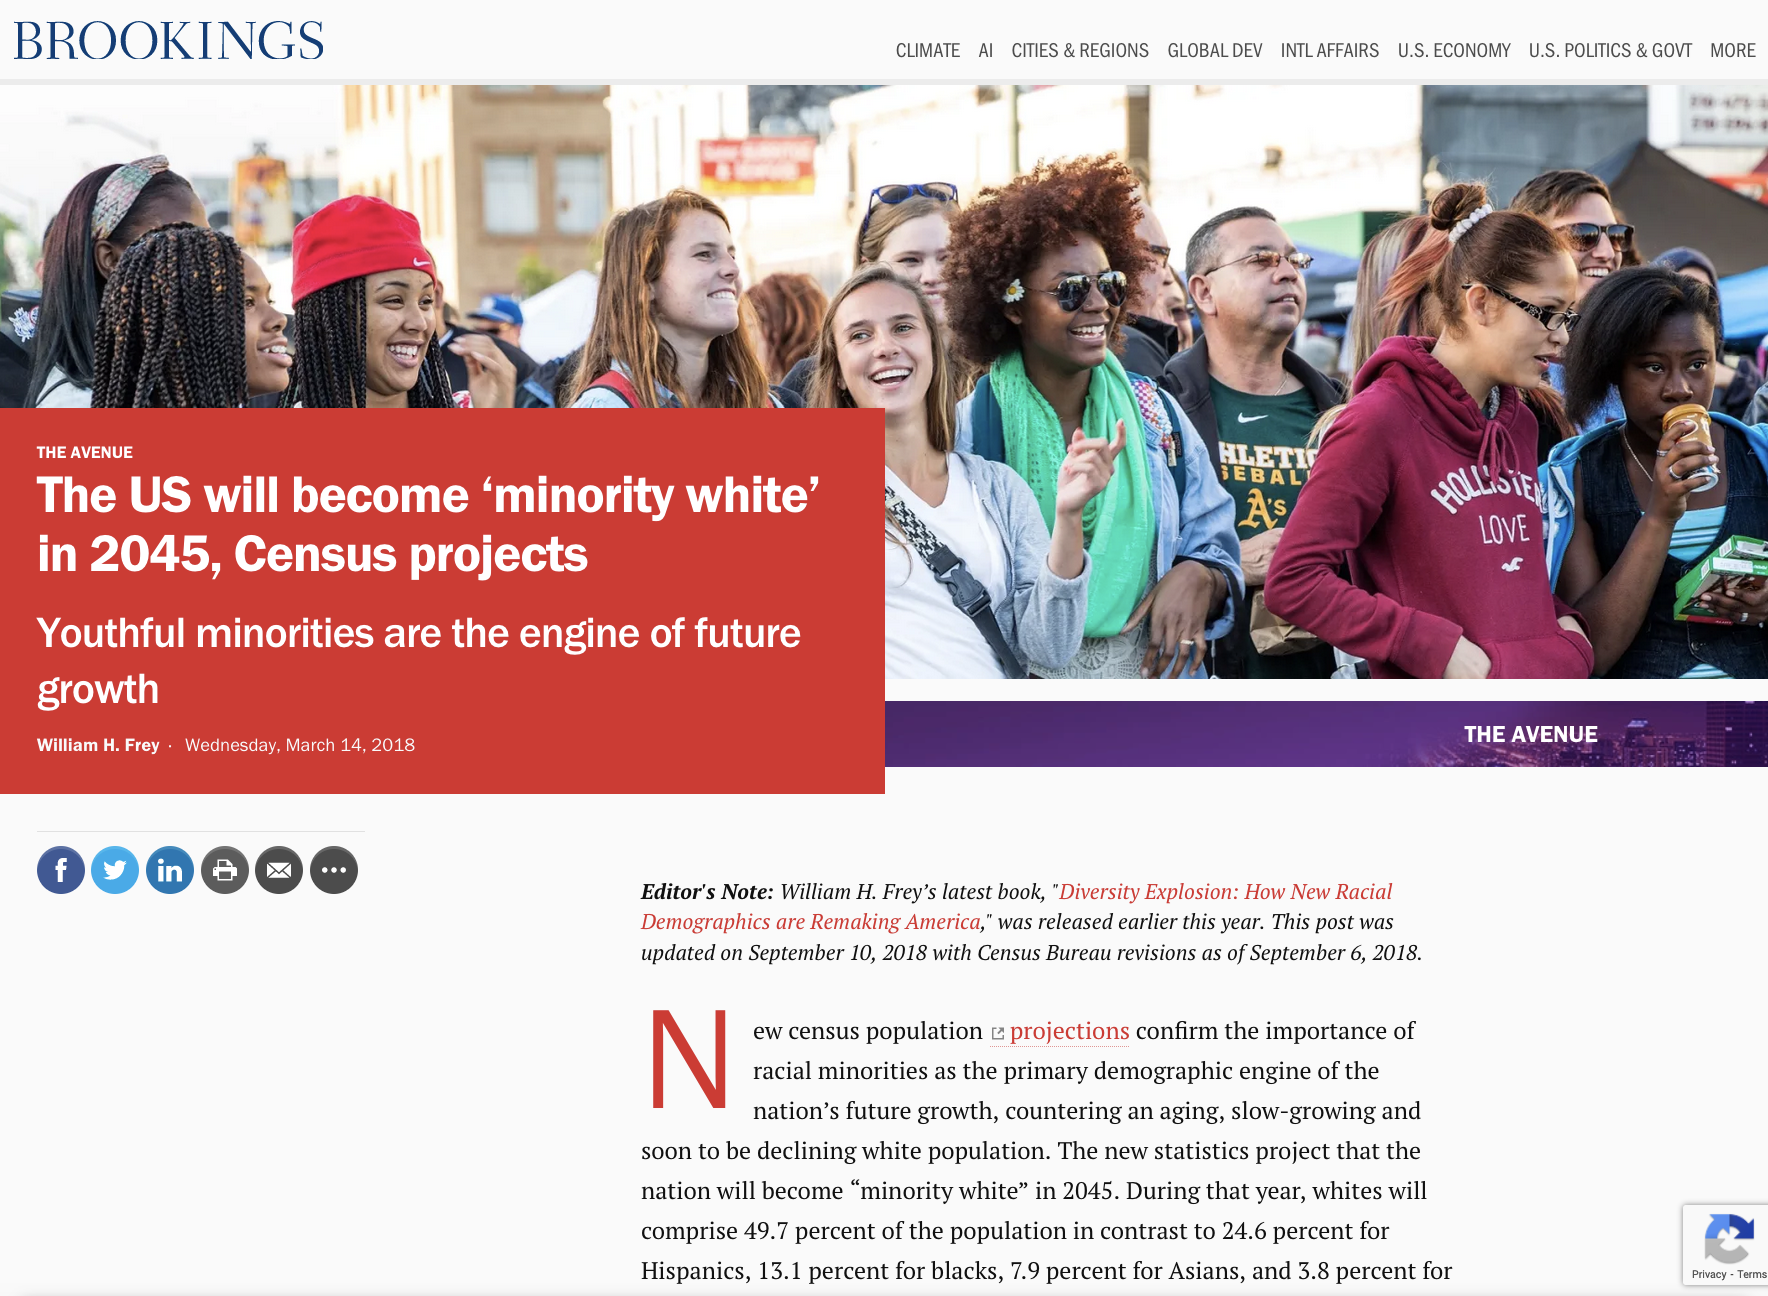 screen shot of Brooks website with article about race in the US